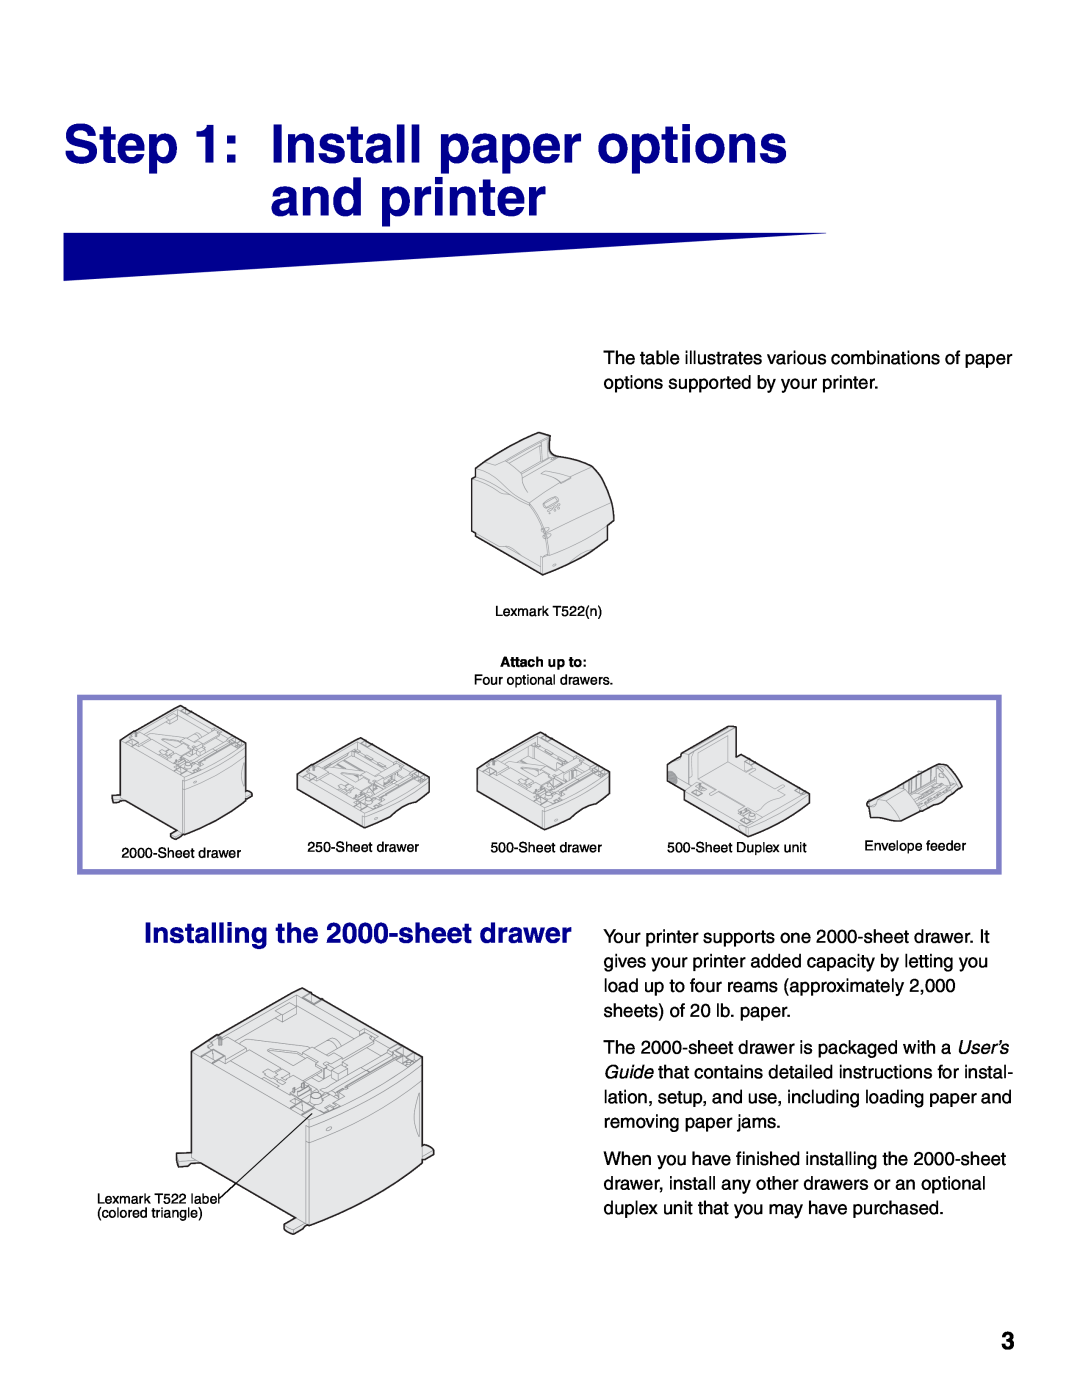 Lexmark 522 setup guide Install paper options and printer, Installing the 2000-sheet drawer 